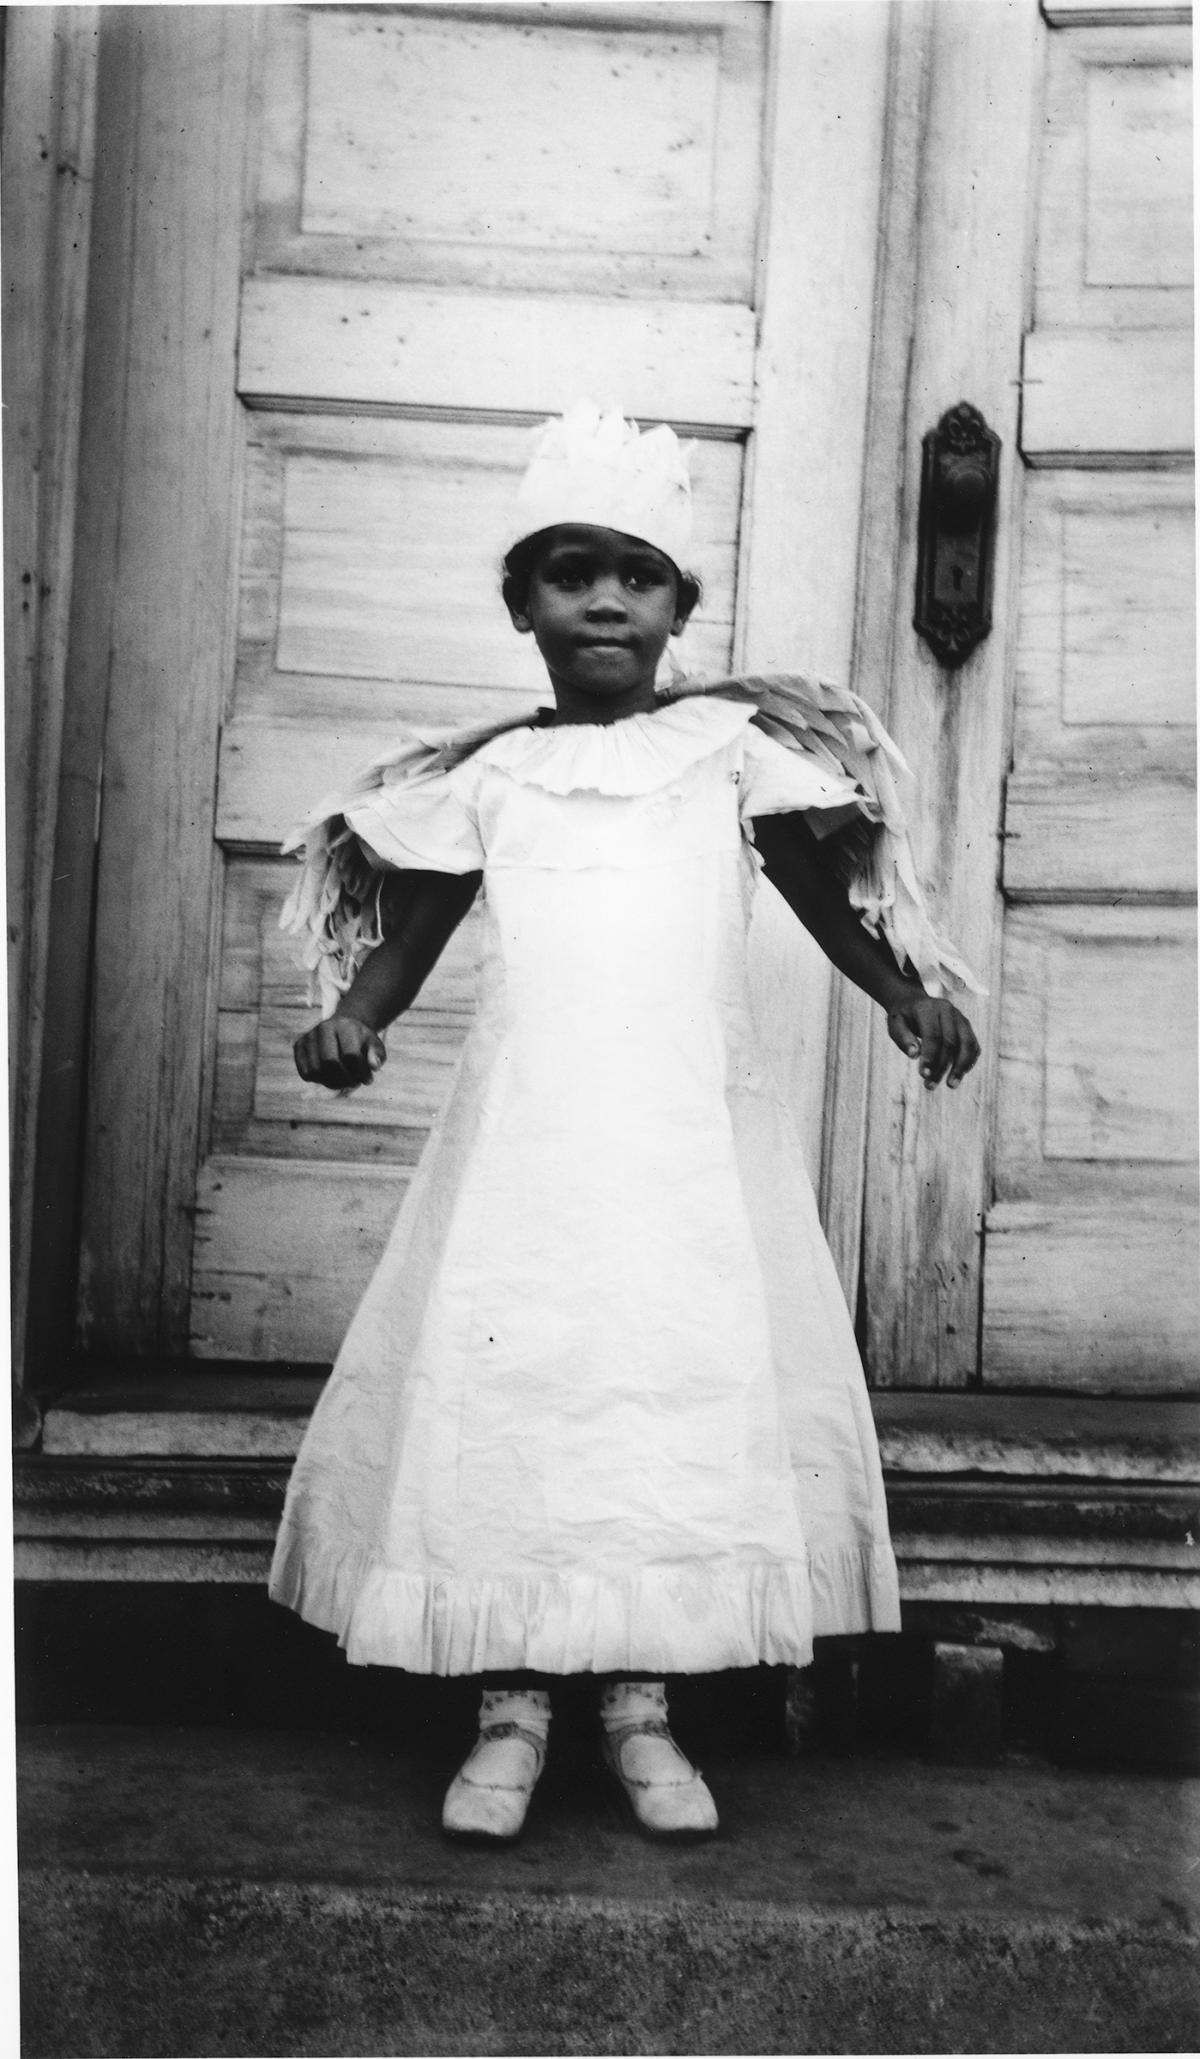 A young African American girl wears a white dress with wings sewn into the shoulders and a feathered flat cap